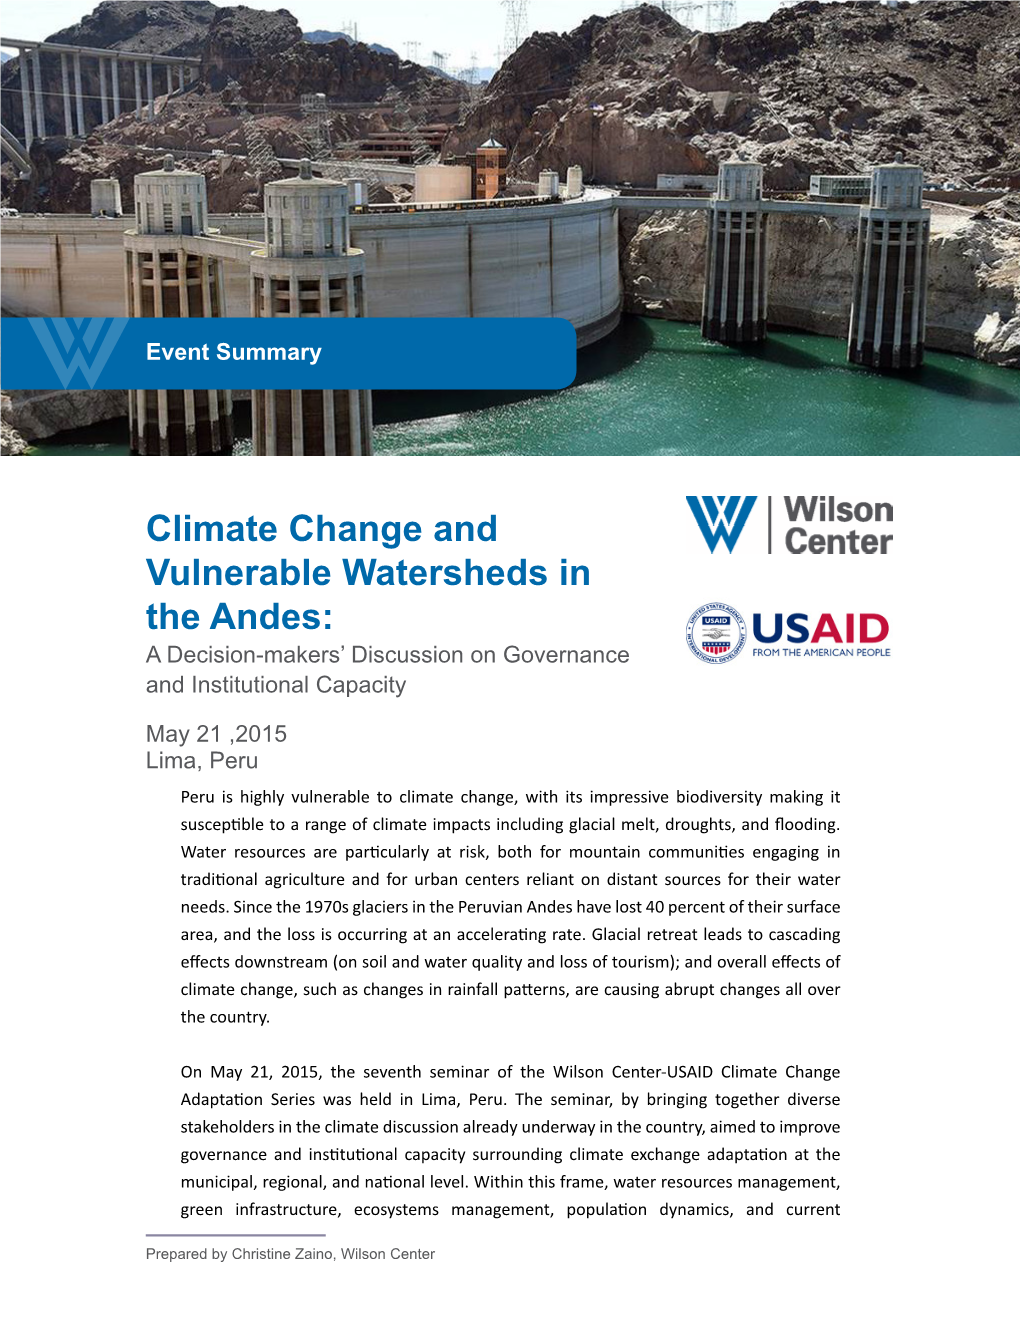 Climate Change and Vulnerable Watersheds in the Andes: a Decision-Makers’ Discussion on Governance and Institutional Capacity